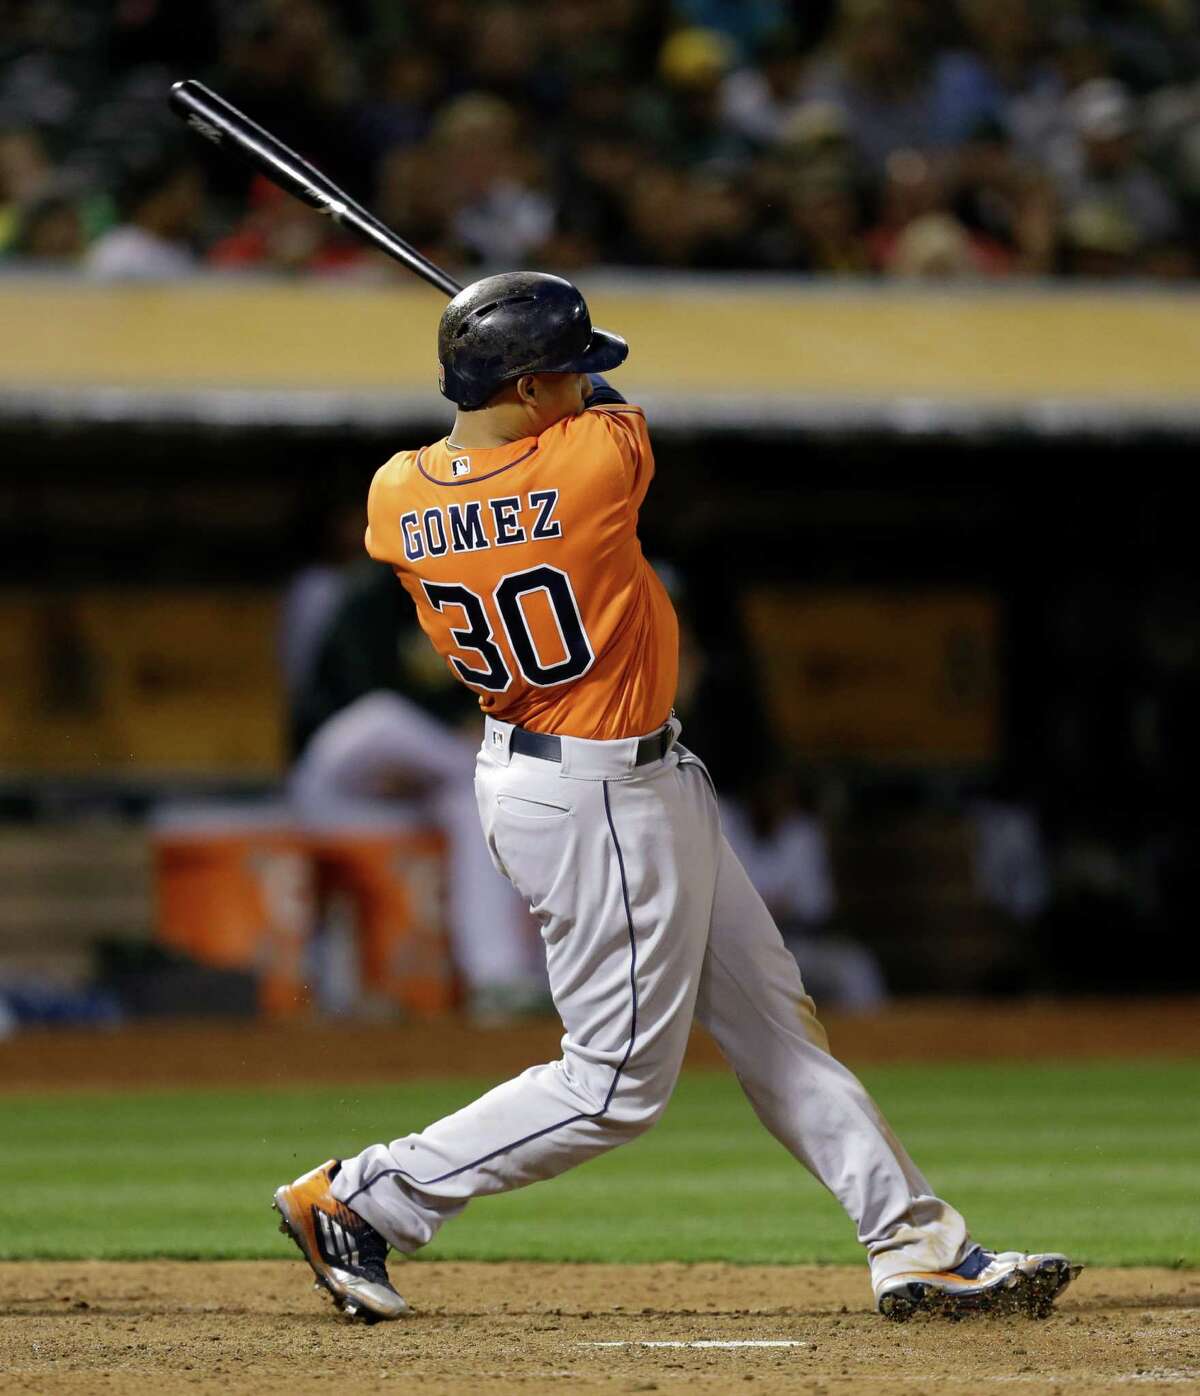 Houston Astros' Carlos Gomez swings for an RBI ground rule double off Oakland Athletics' Sean Doolittle in the sixth inning of a baseball game Friday, April 29, 2016, in Oakland, Calif. (AP Photo/Ben Margot)